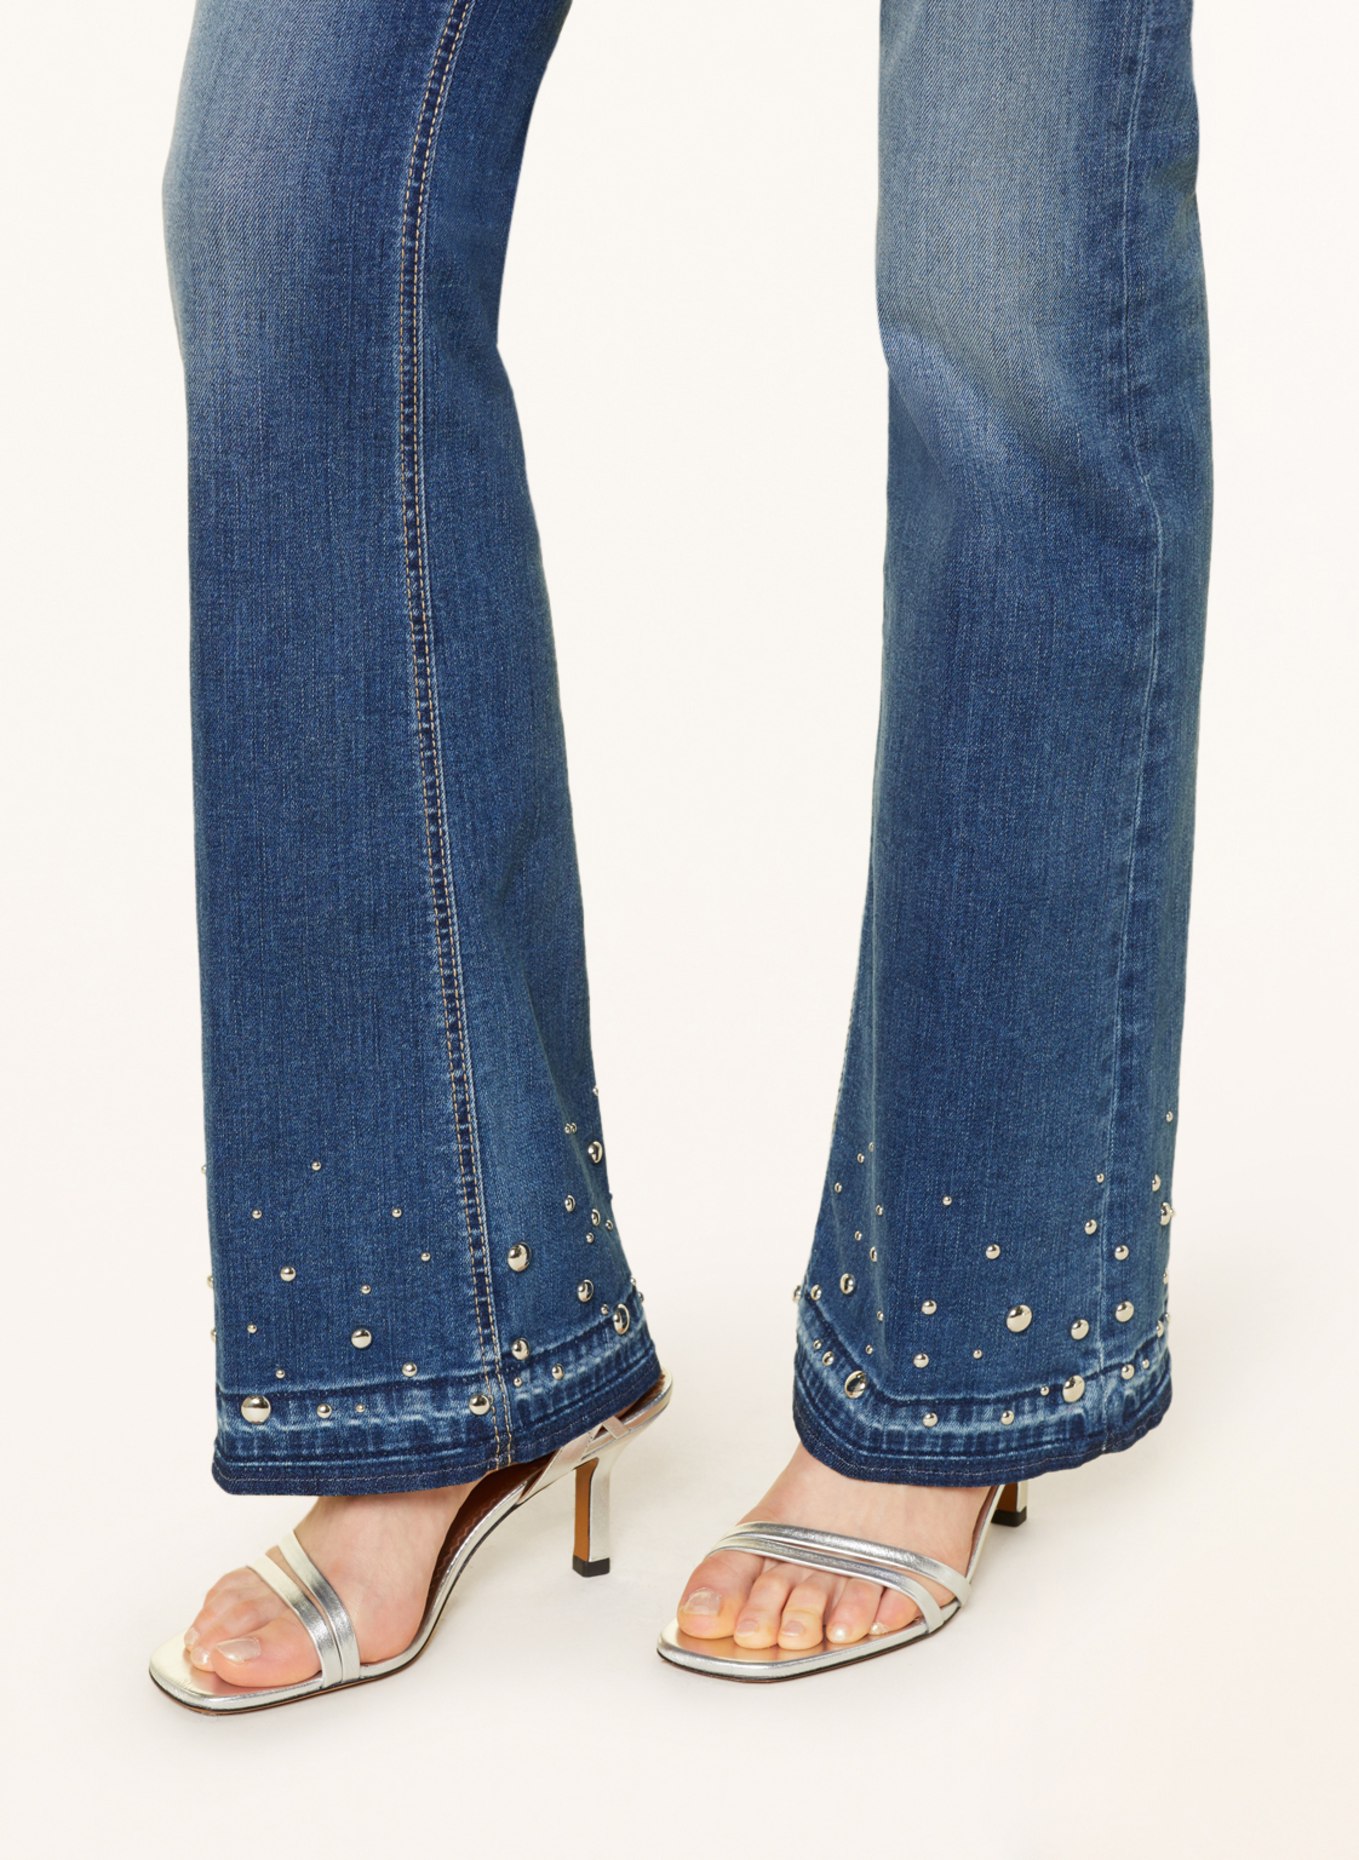 CAMBIO Flared jeans PARIS with rivets, Color: 5138 mid used contrast open he (Image 5)